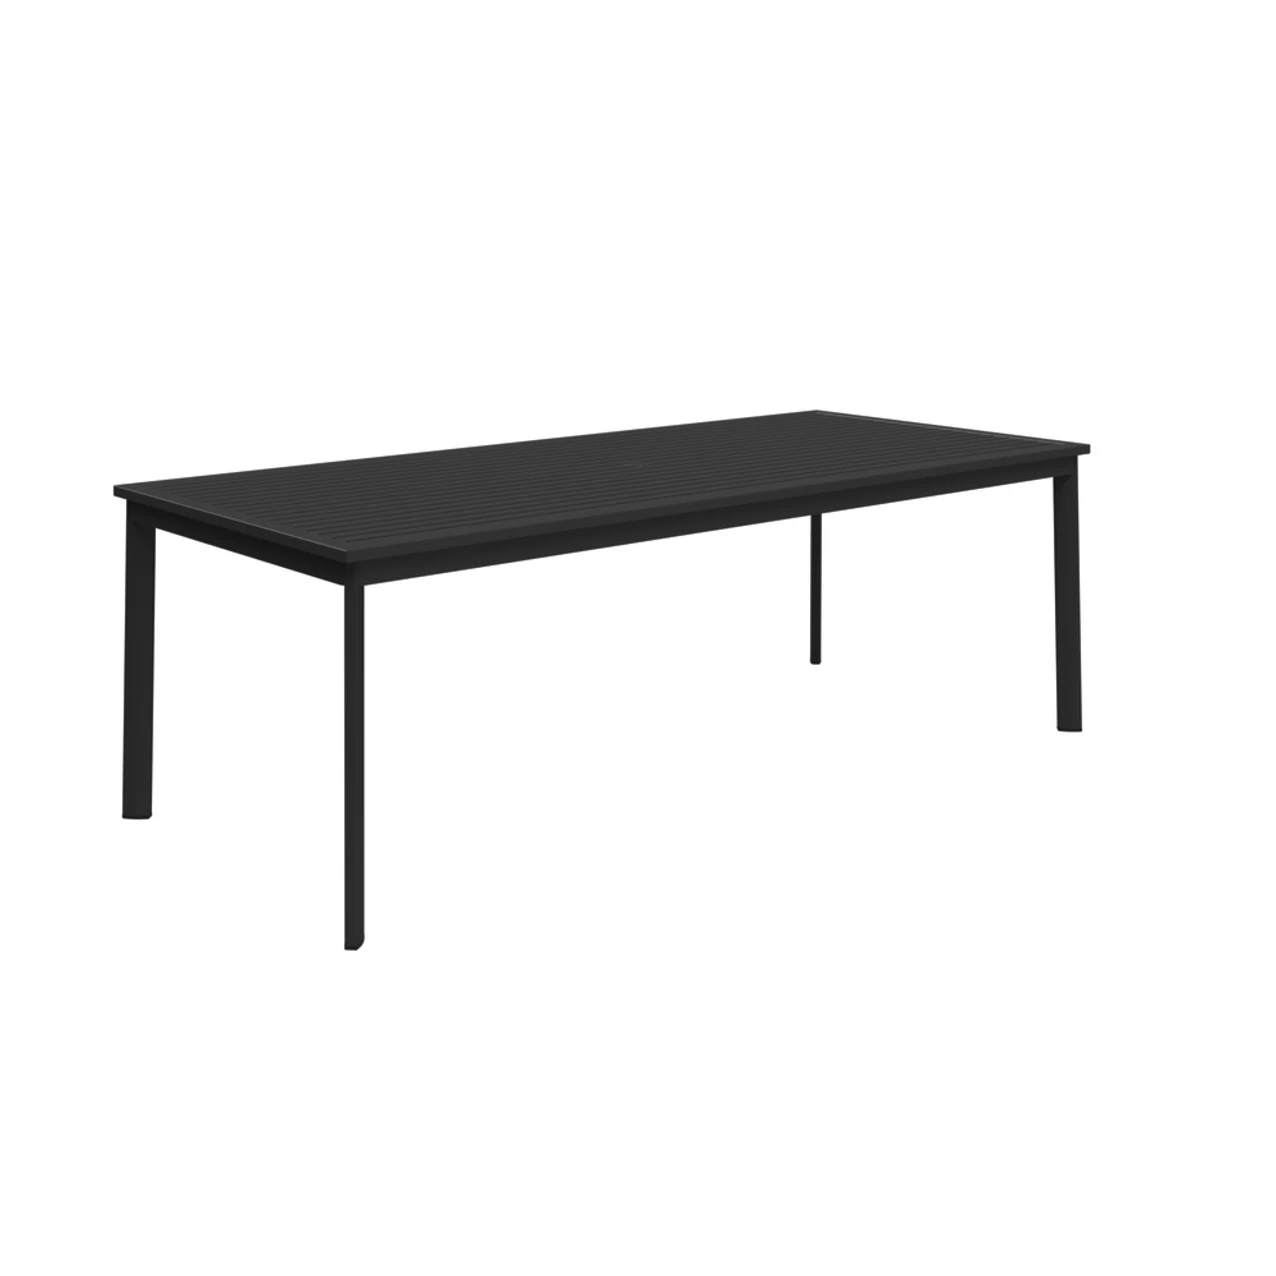 Metz 86.5" Dining Table: Aluminum Table Top